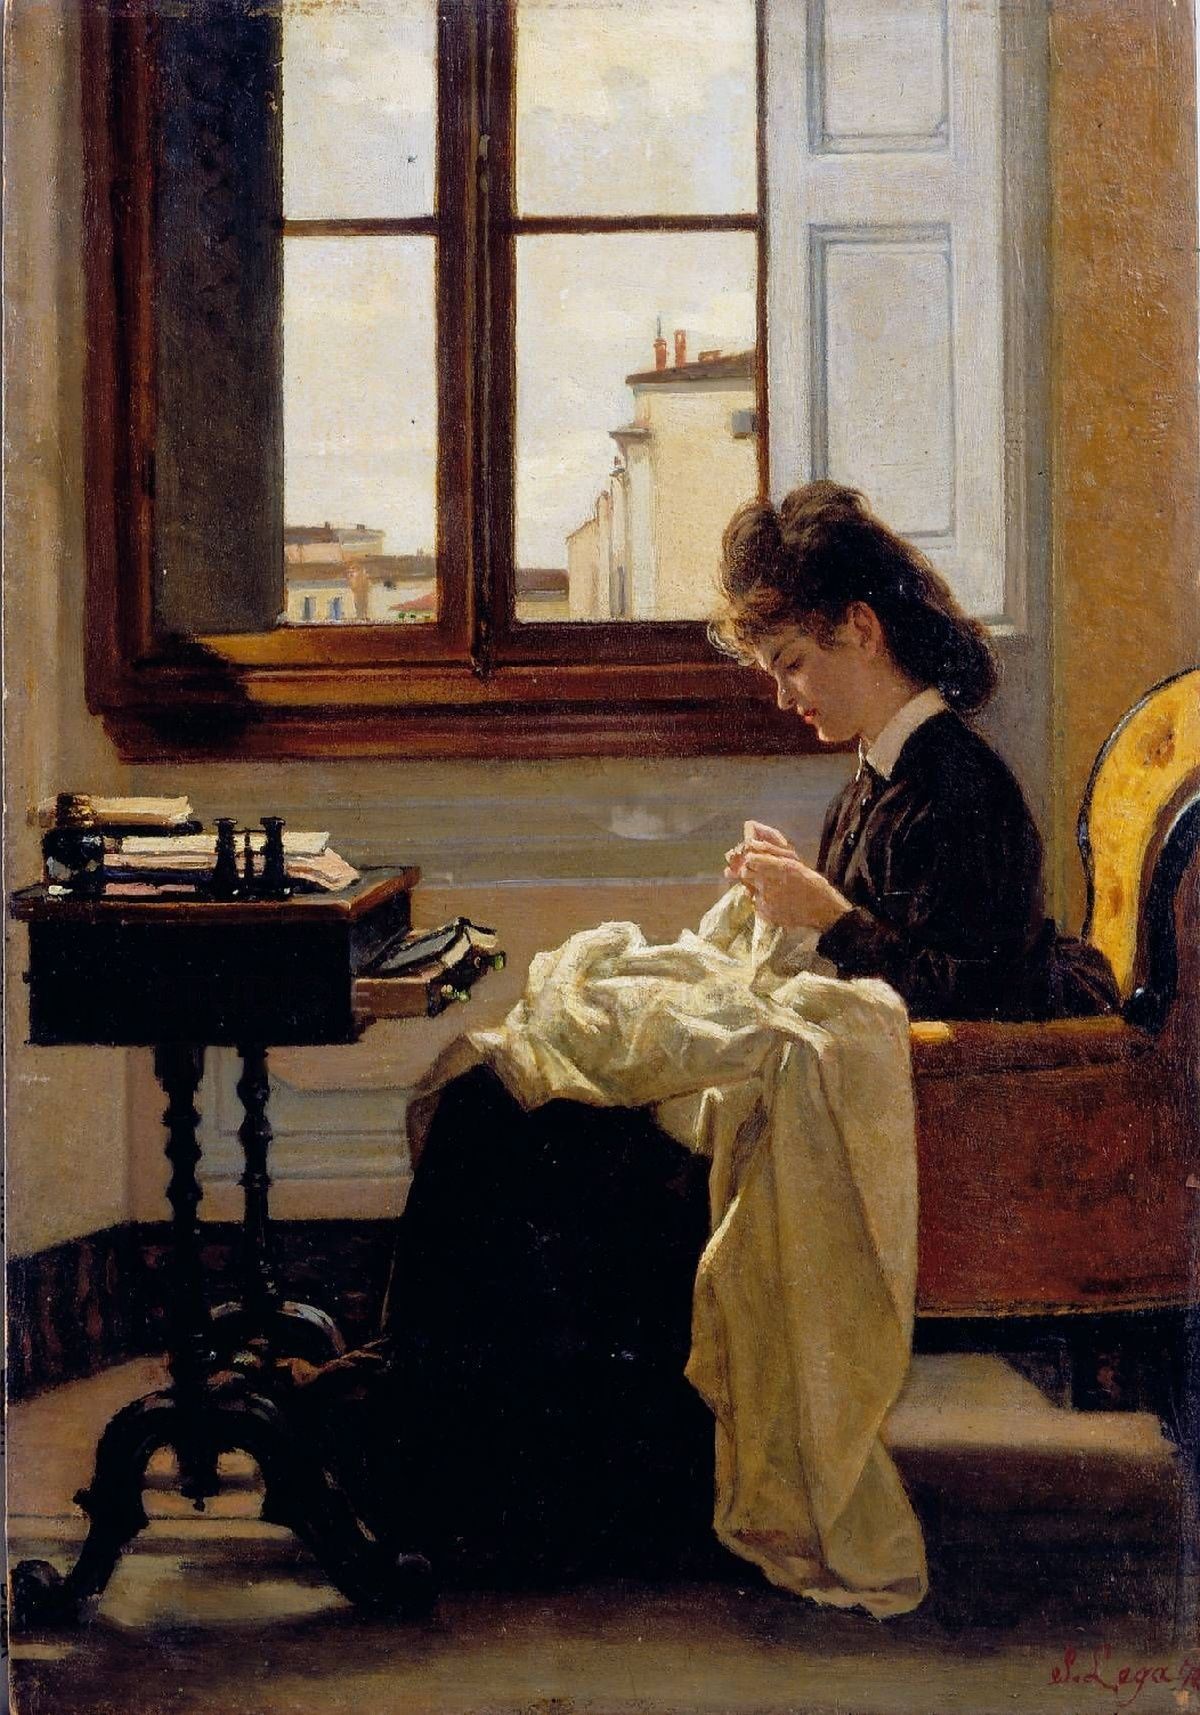 Painting: a woman sits in an armchair by a large window. In front of her is a sewing table with the bottom drawer open. On her lap is a pile of fabric she is sewing.